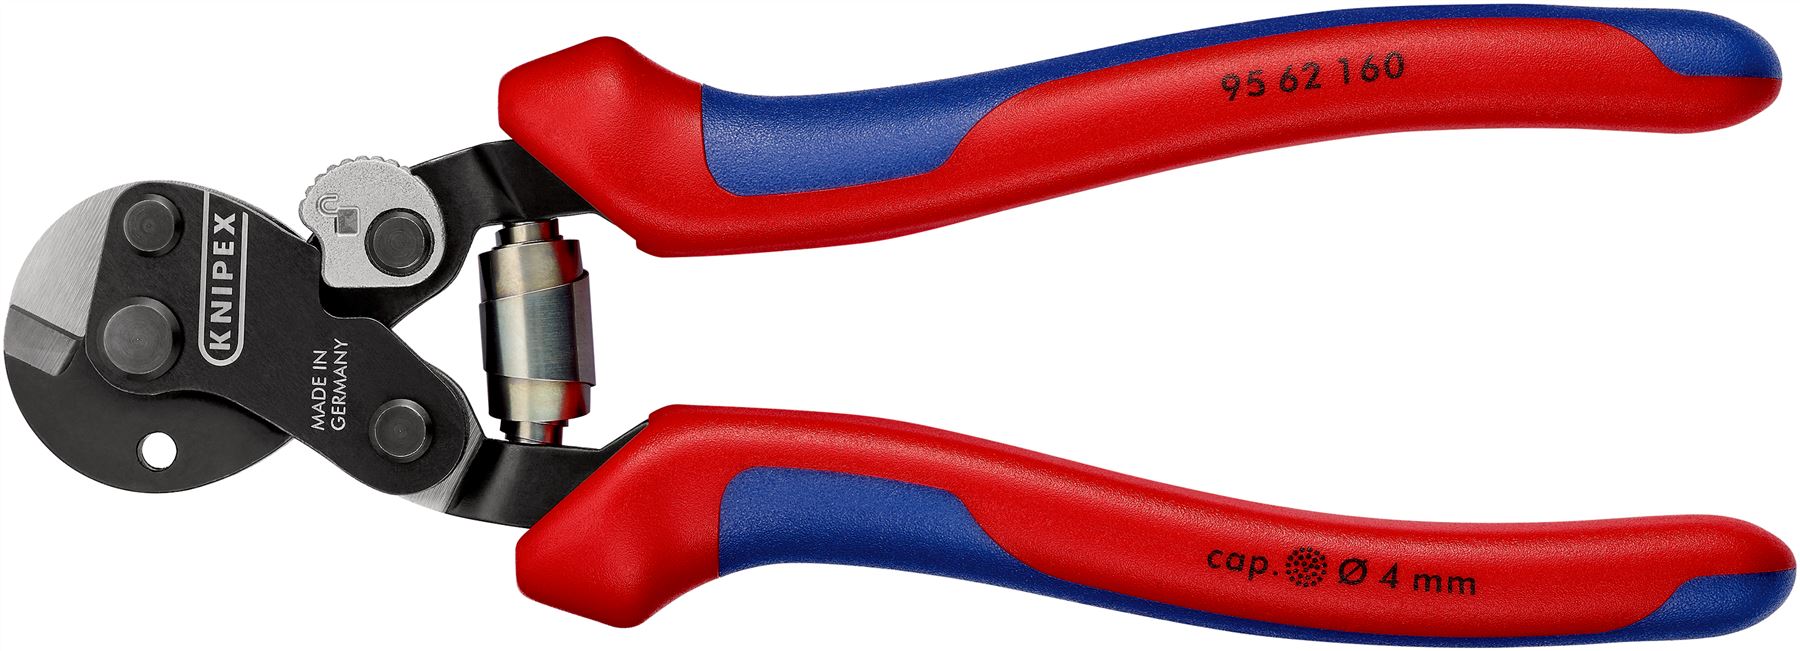 Knipex Wire Rope Cutter Multi Component Grips up to 6mm Cutting Capacity 160mm 95 62 160